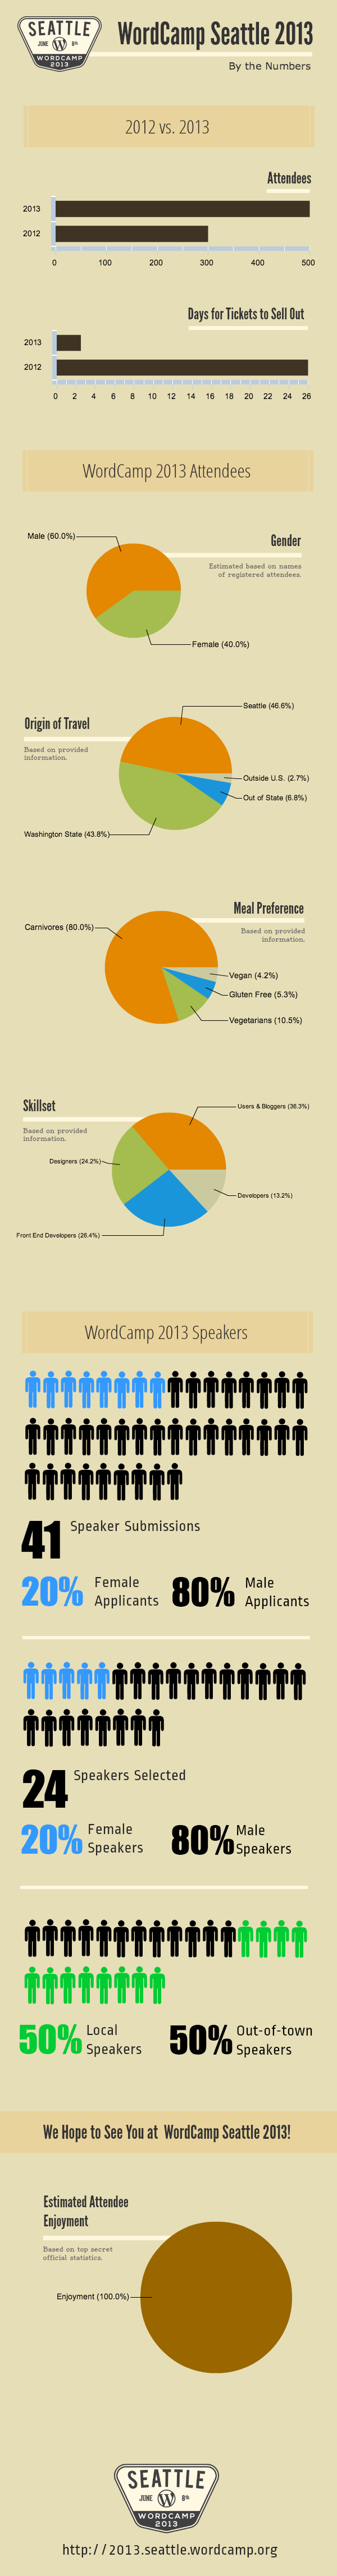 Seattle WordCamp 2013 by the numbers Infographic